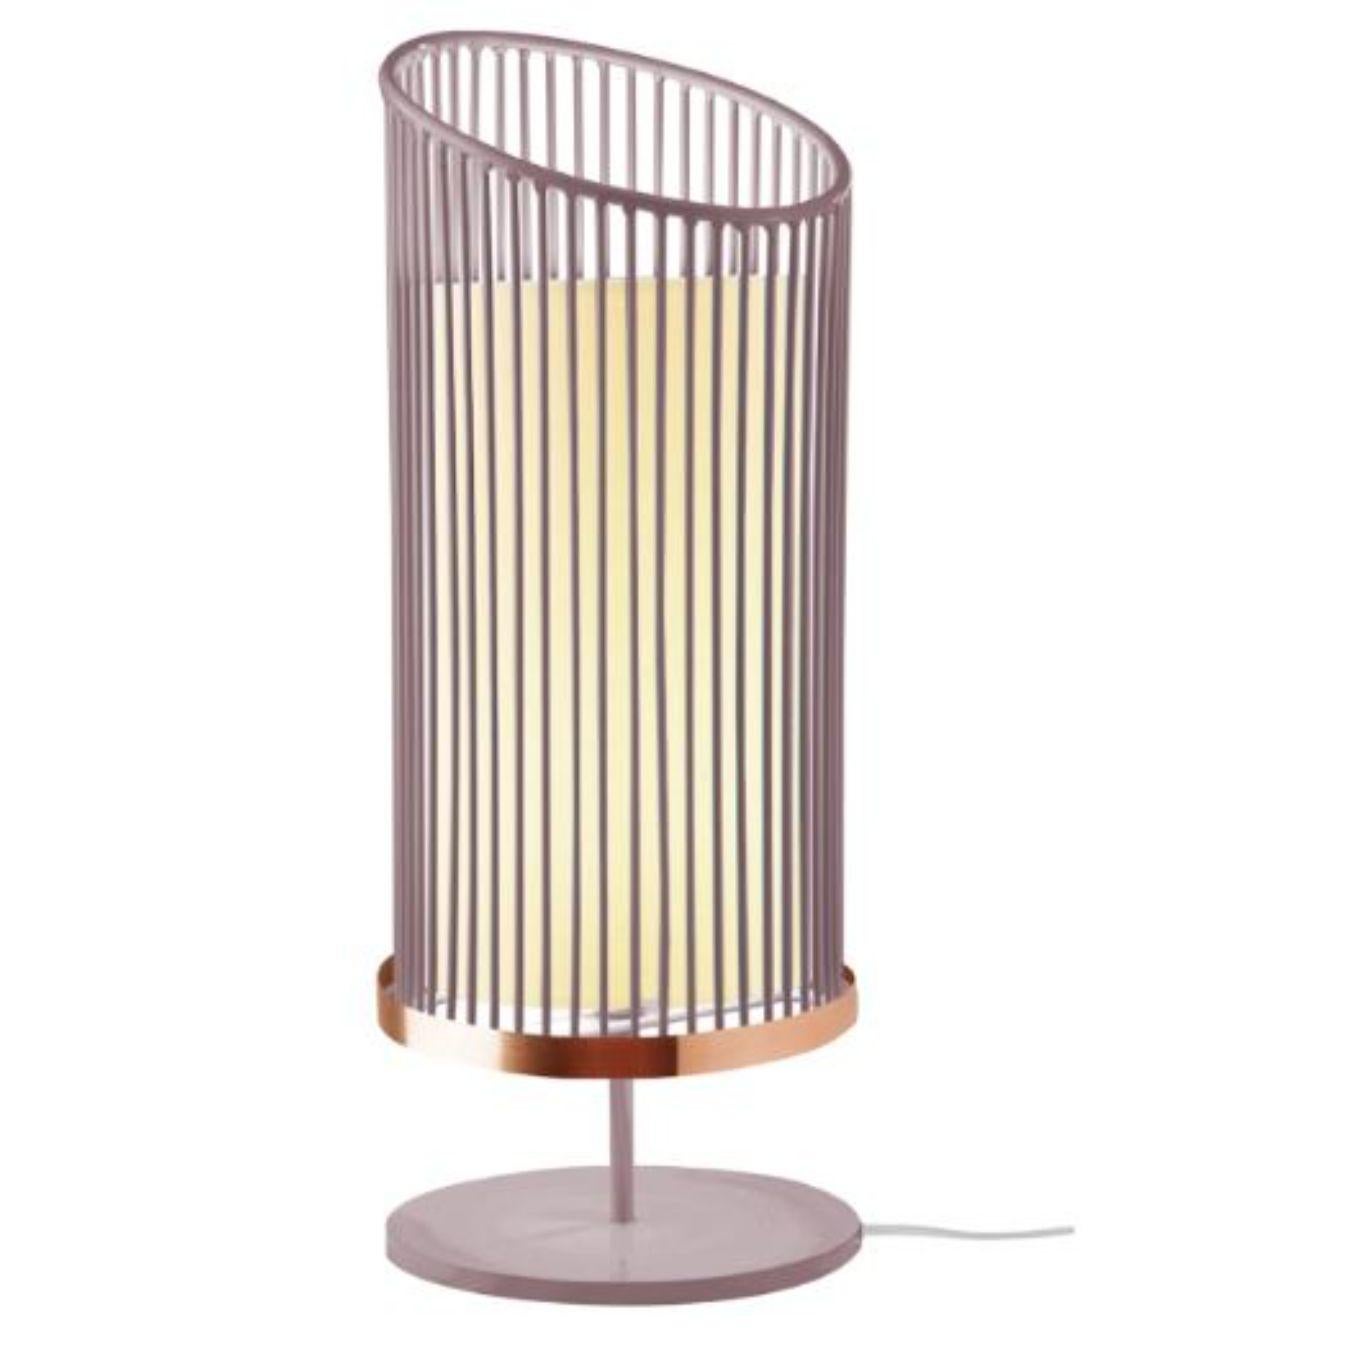 Lilac new spider table lamp with copper ring by Dooq.
Dimensions: W 24 x D 24 x H 60 cm.
Materials: lacquered metal, polished or brushed metal, copper.
Also available in different colors and materials.

Information:
230V/50Hz
E27/1x20W